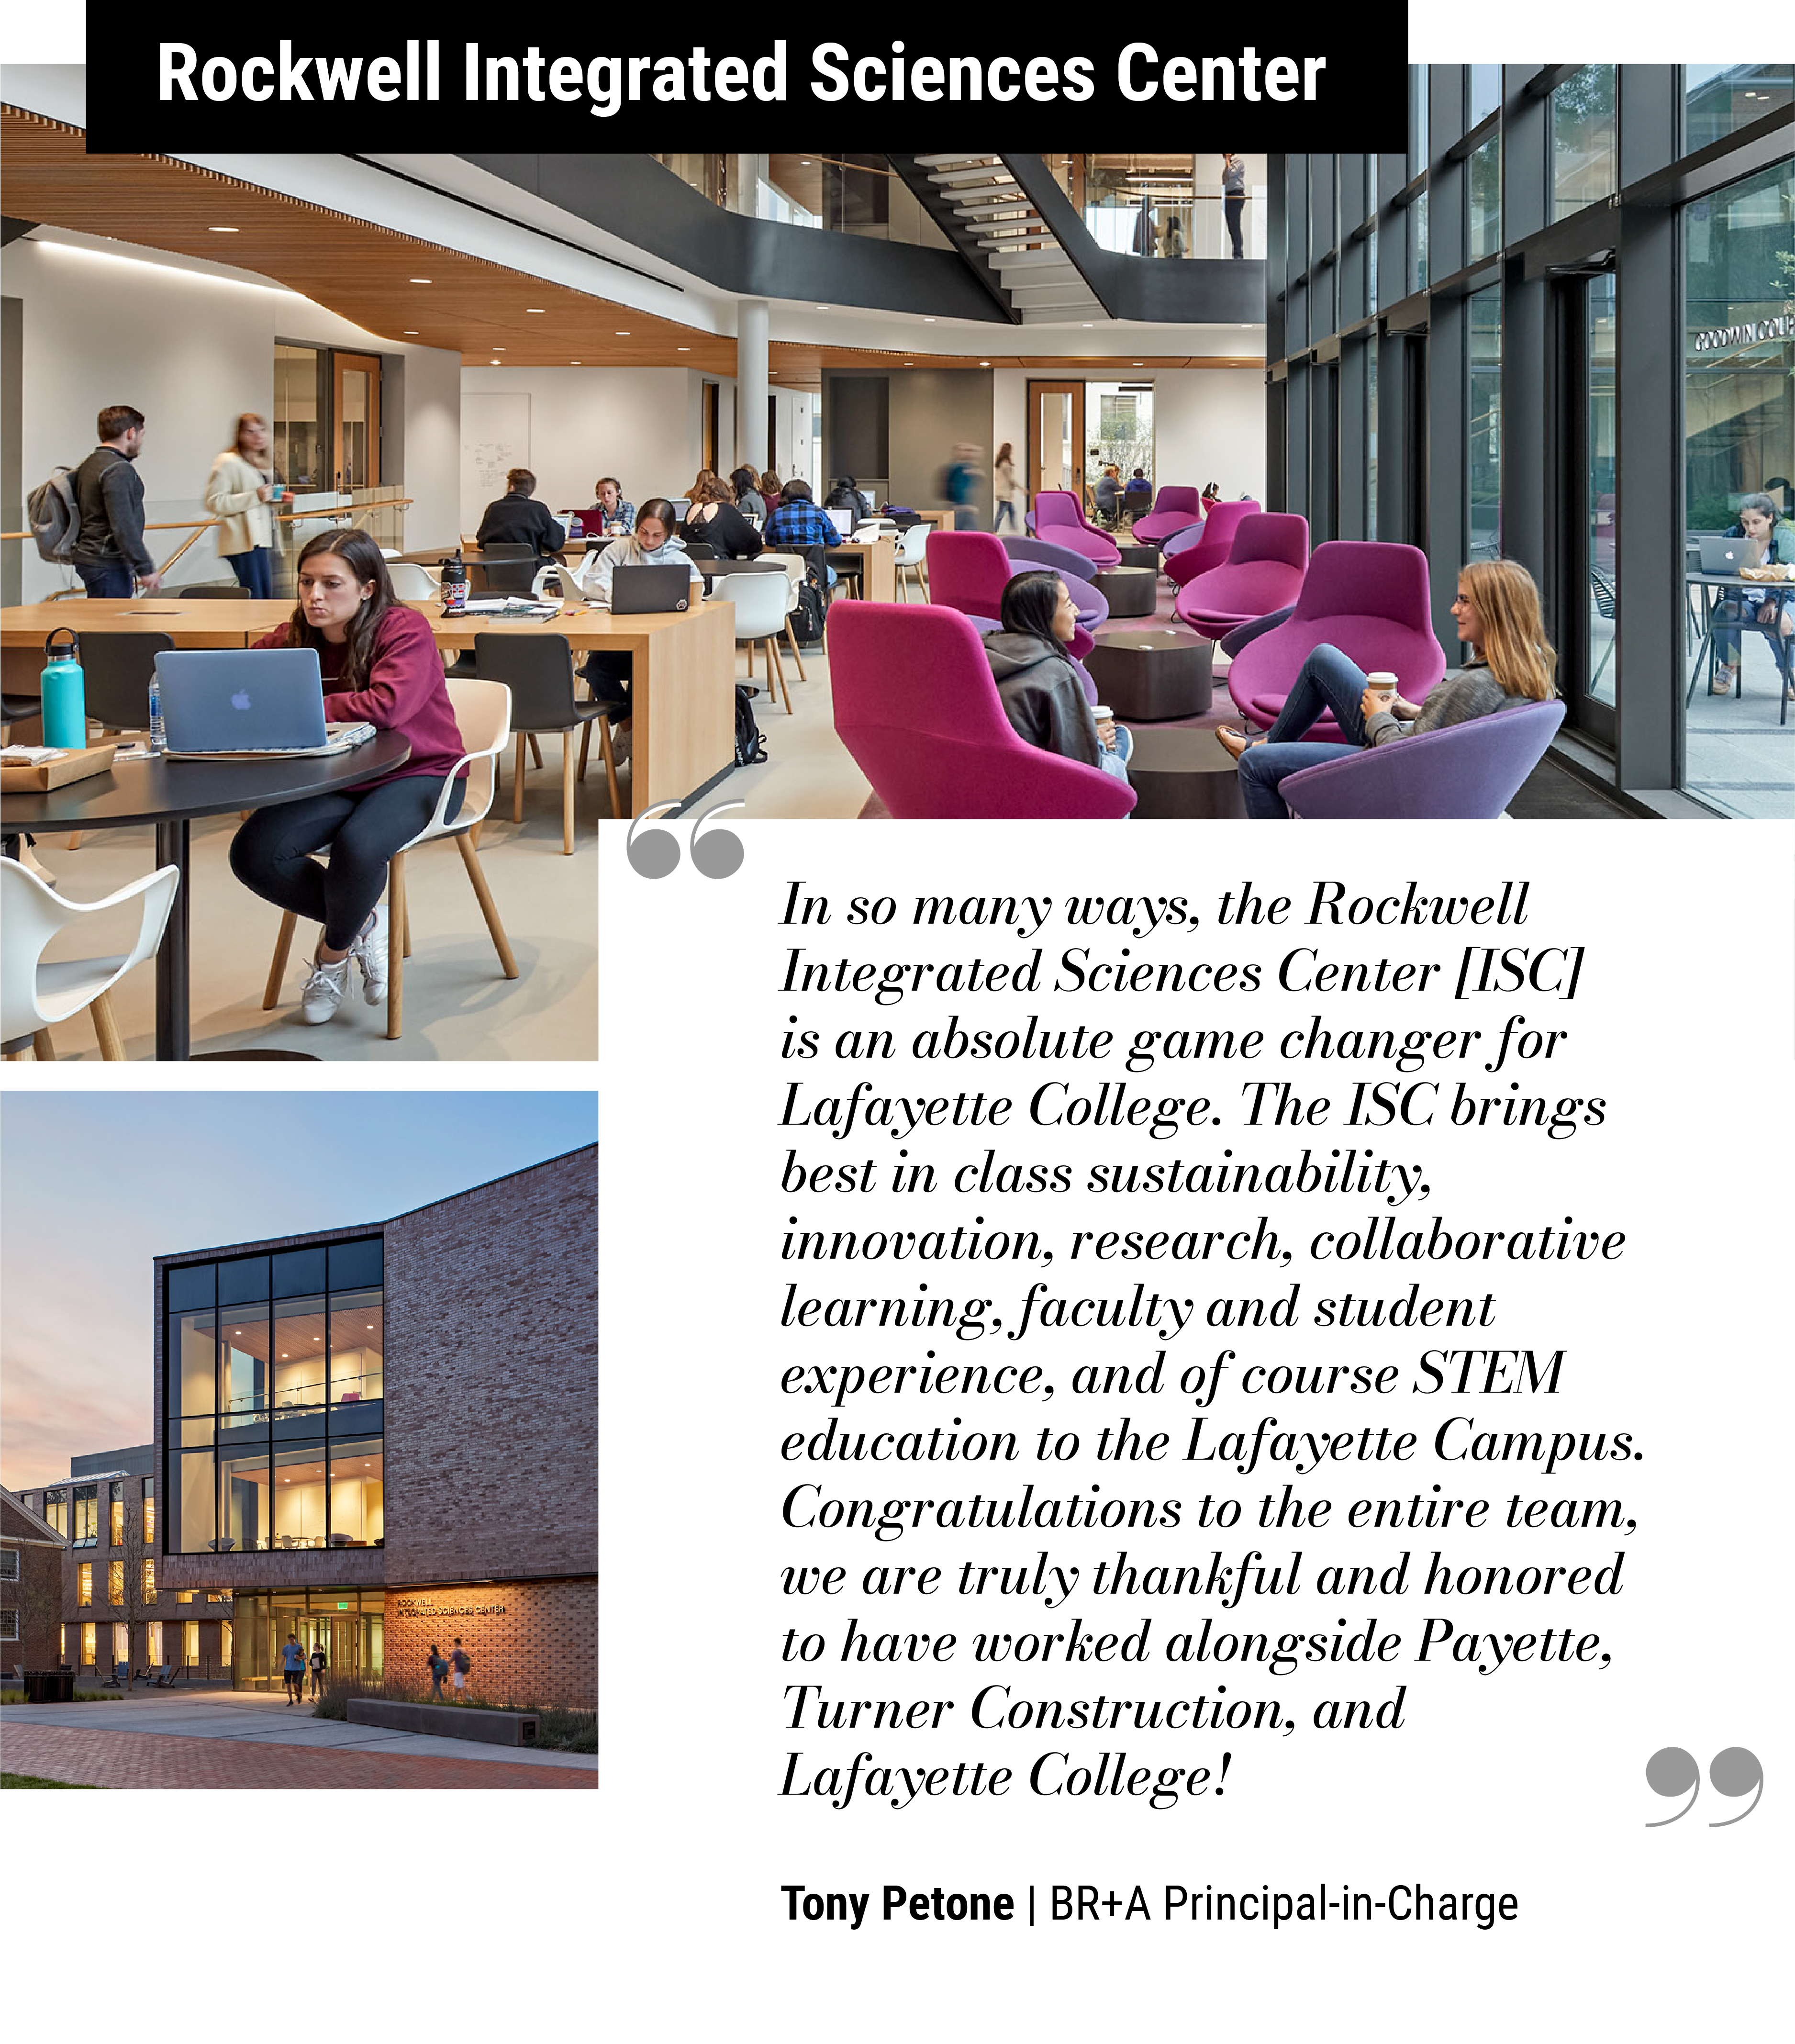 Rockwell Integrated Sciences Center